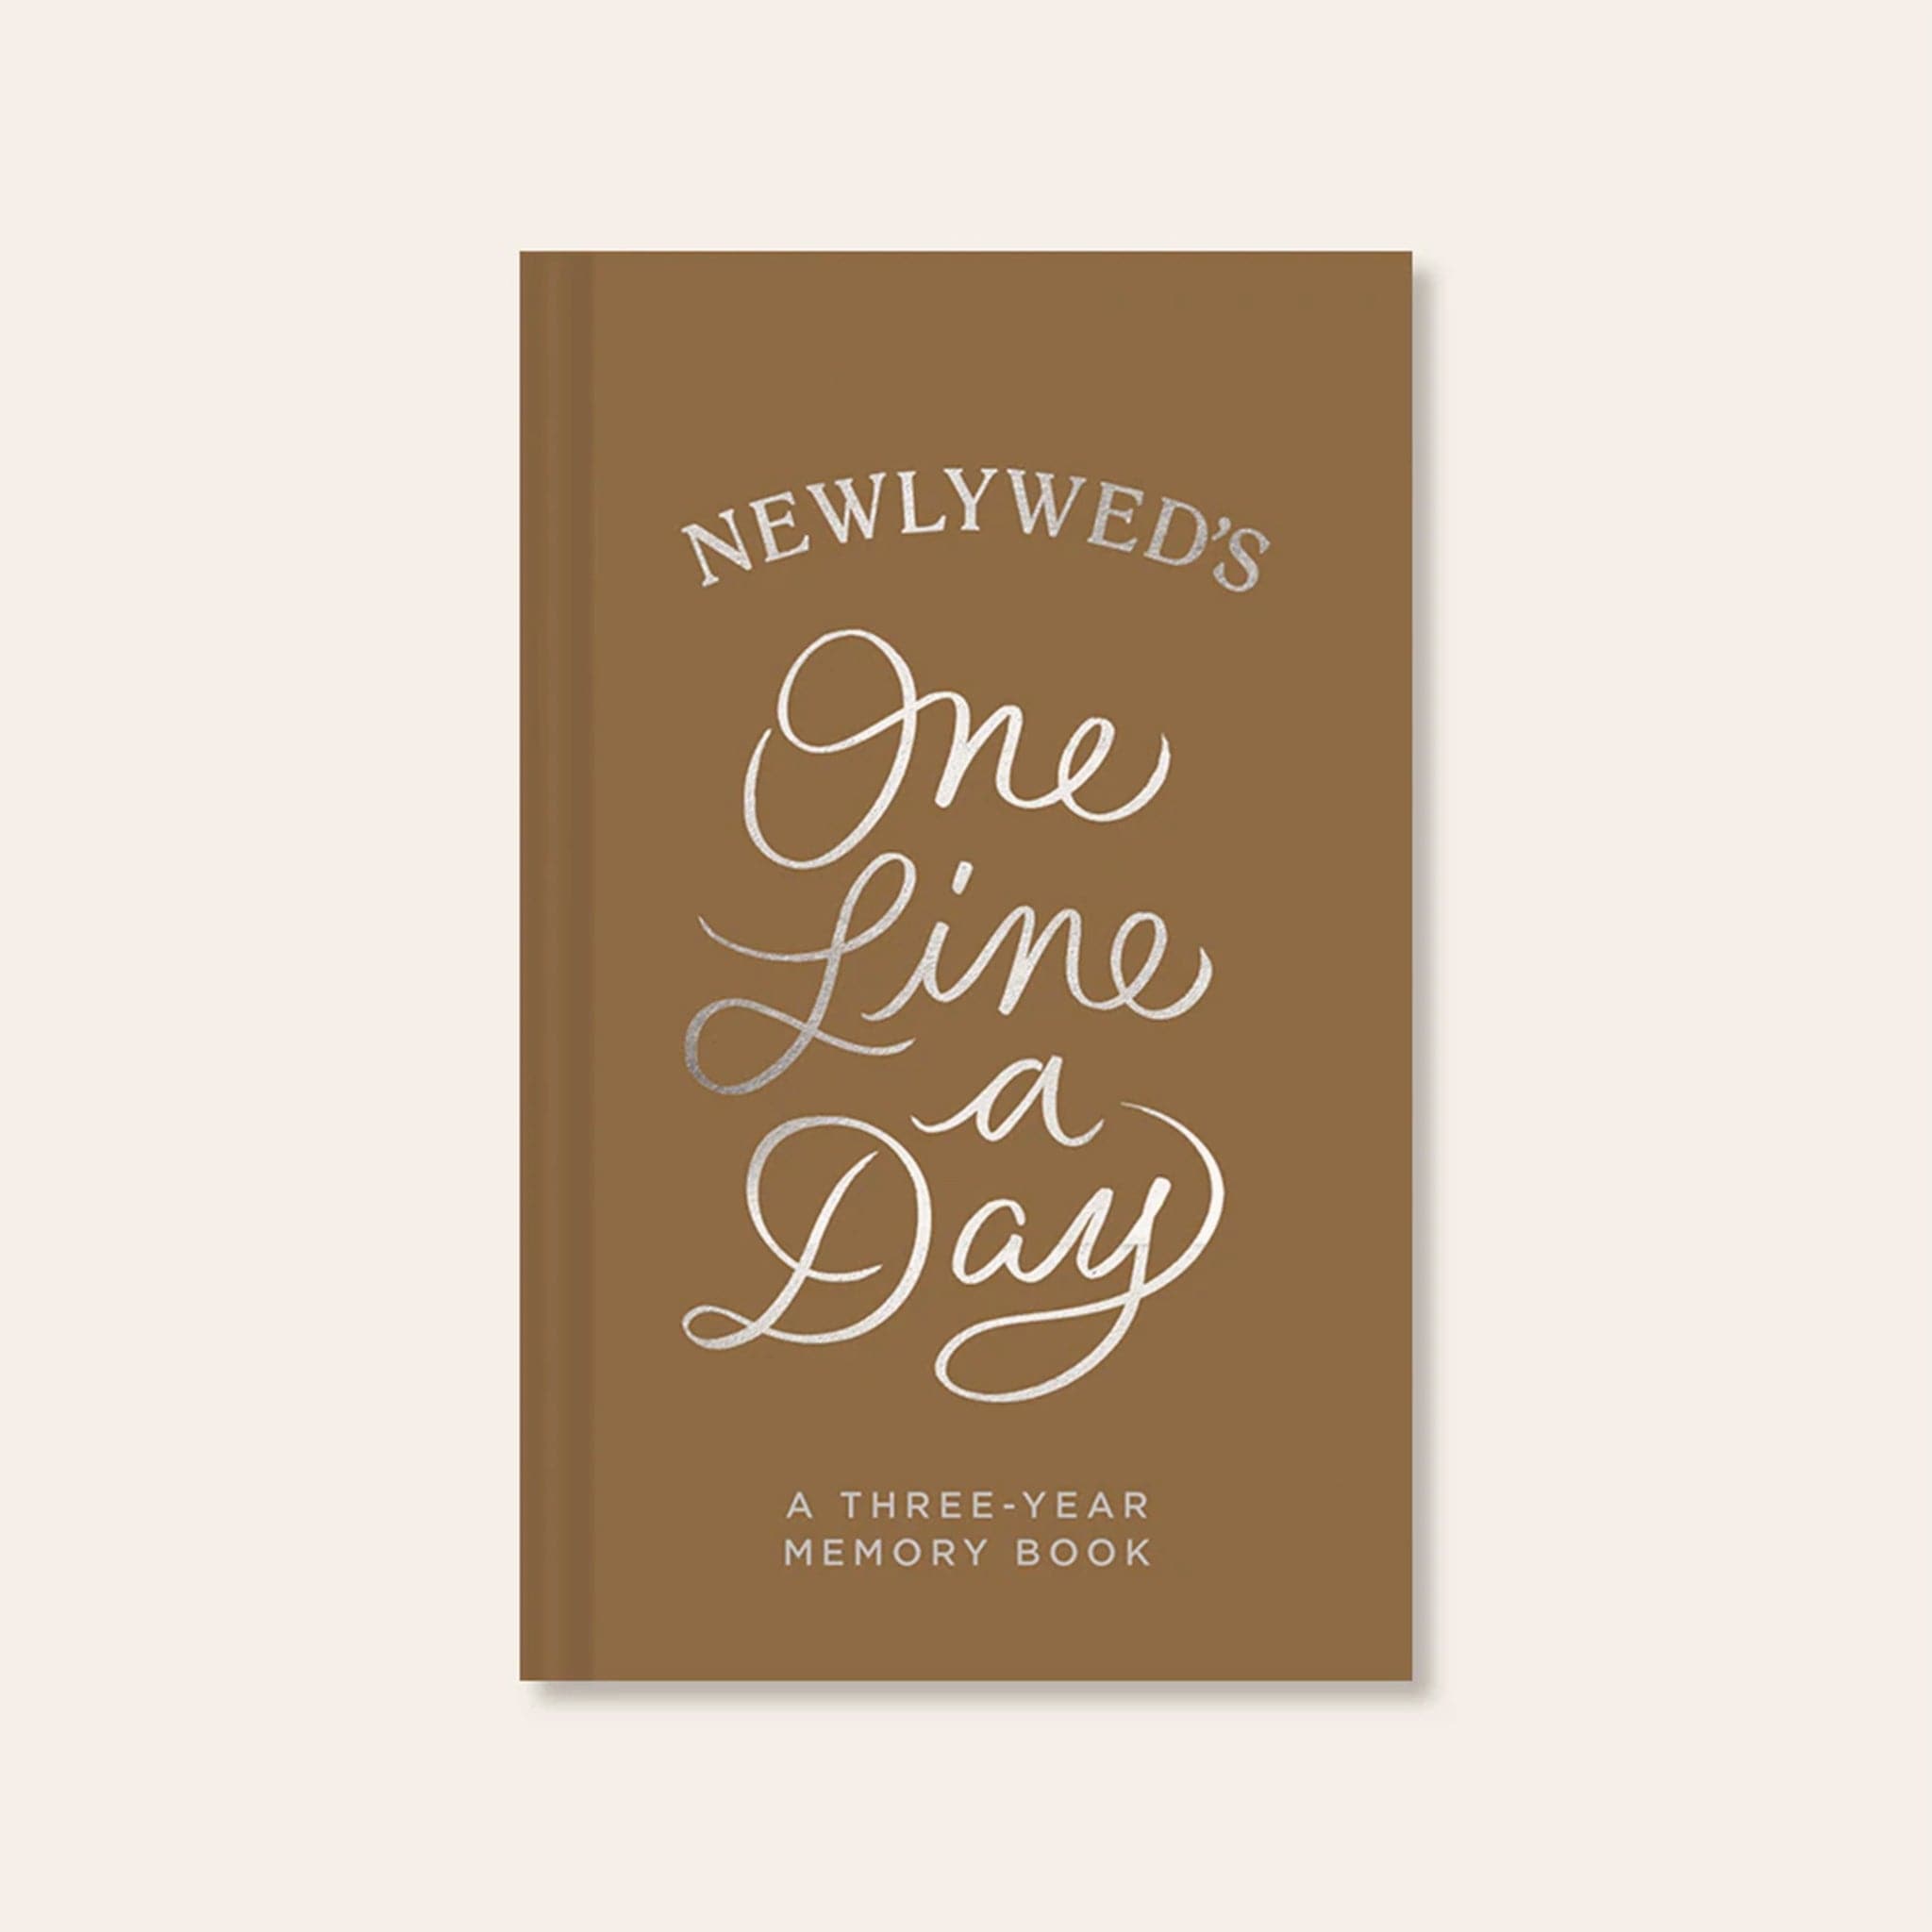 High quality, honey toned memory book reading 'Newlywed's one line a day; a three year memory book' in silver foil lettering across the padded cover.